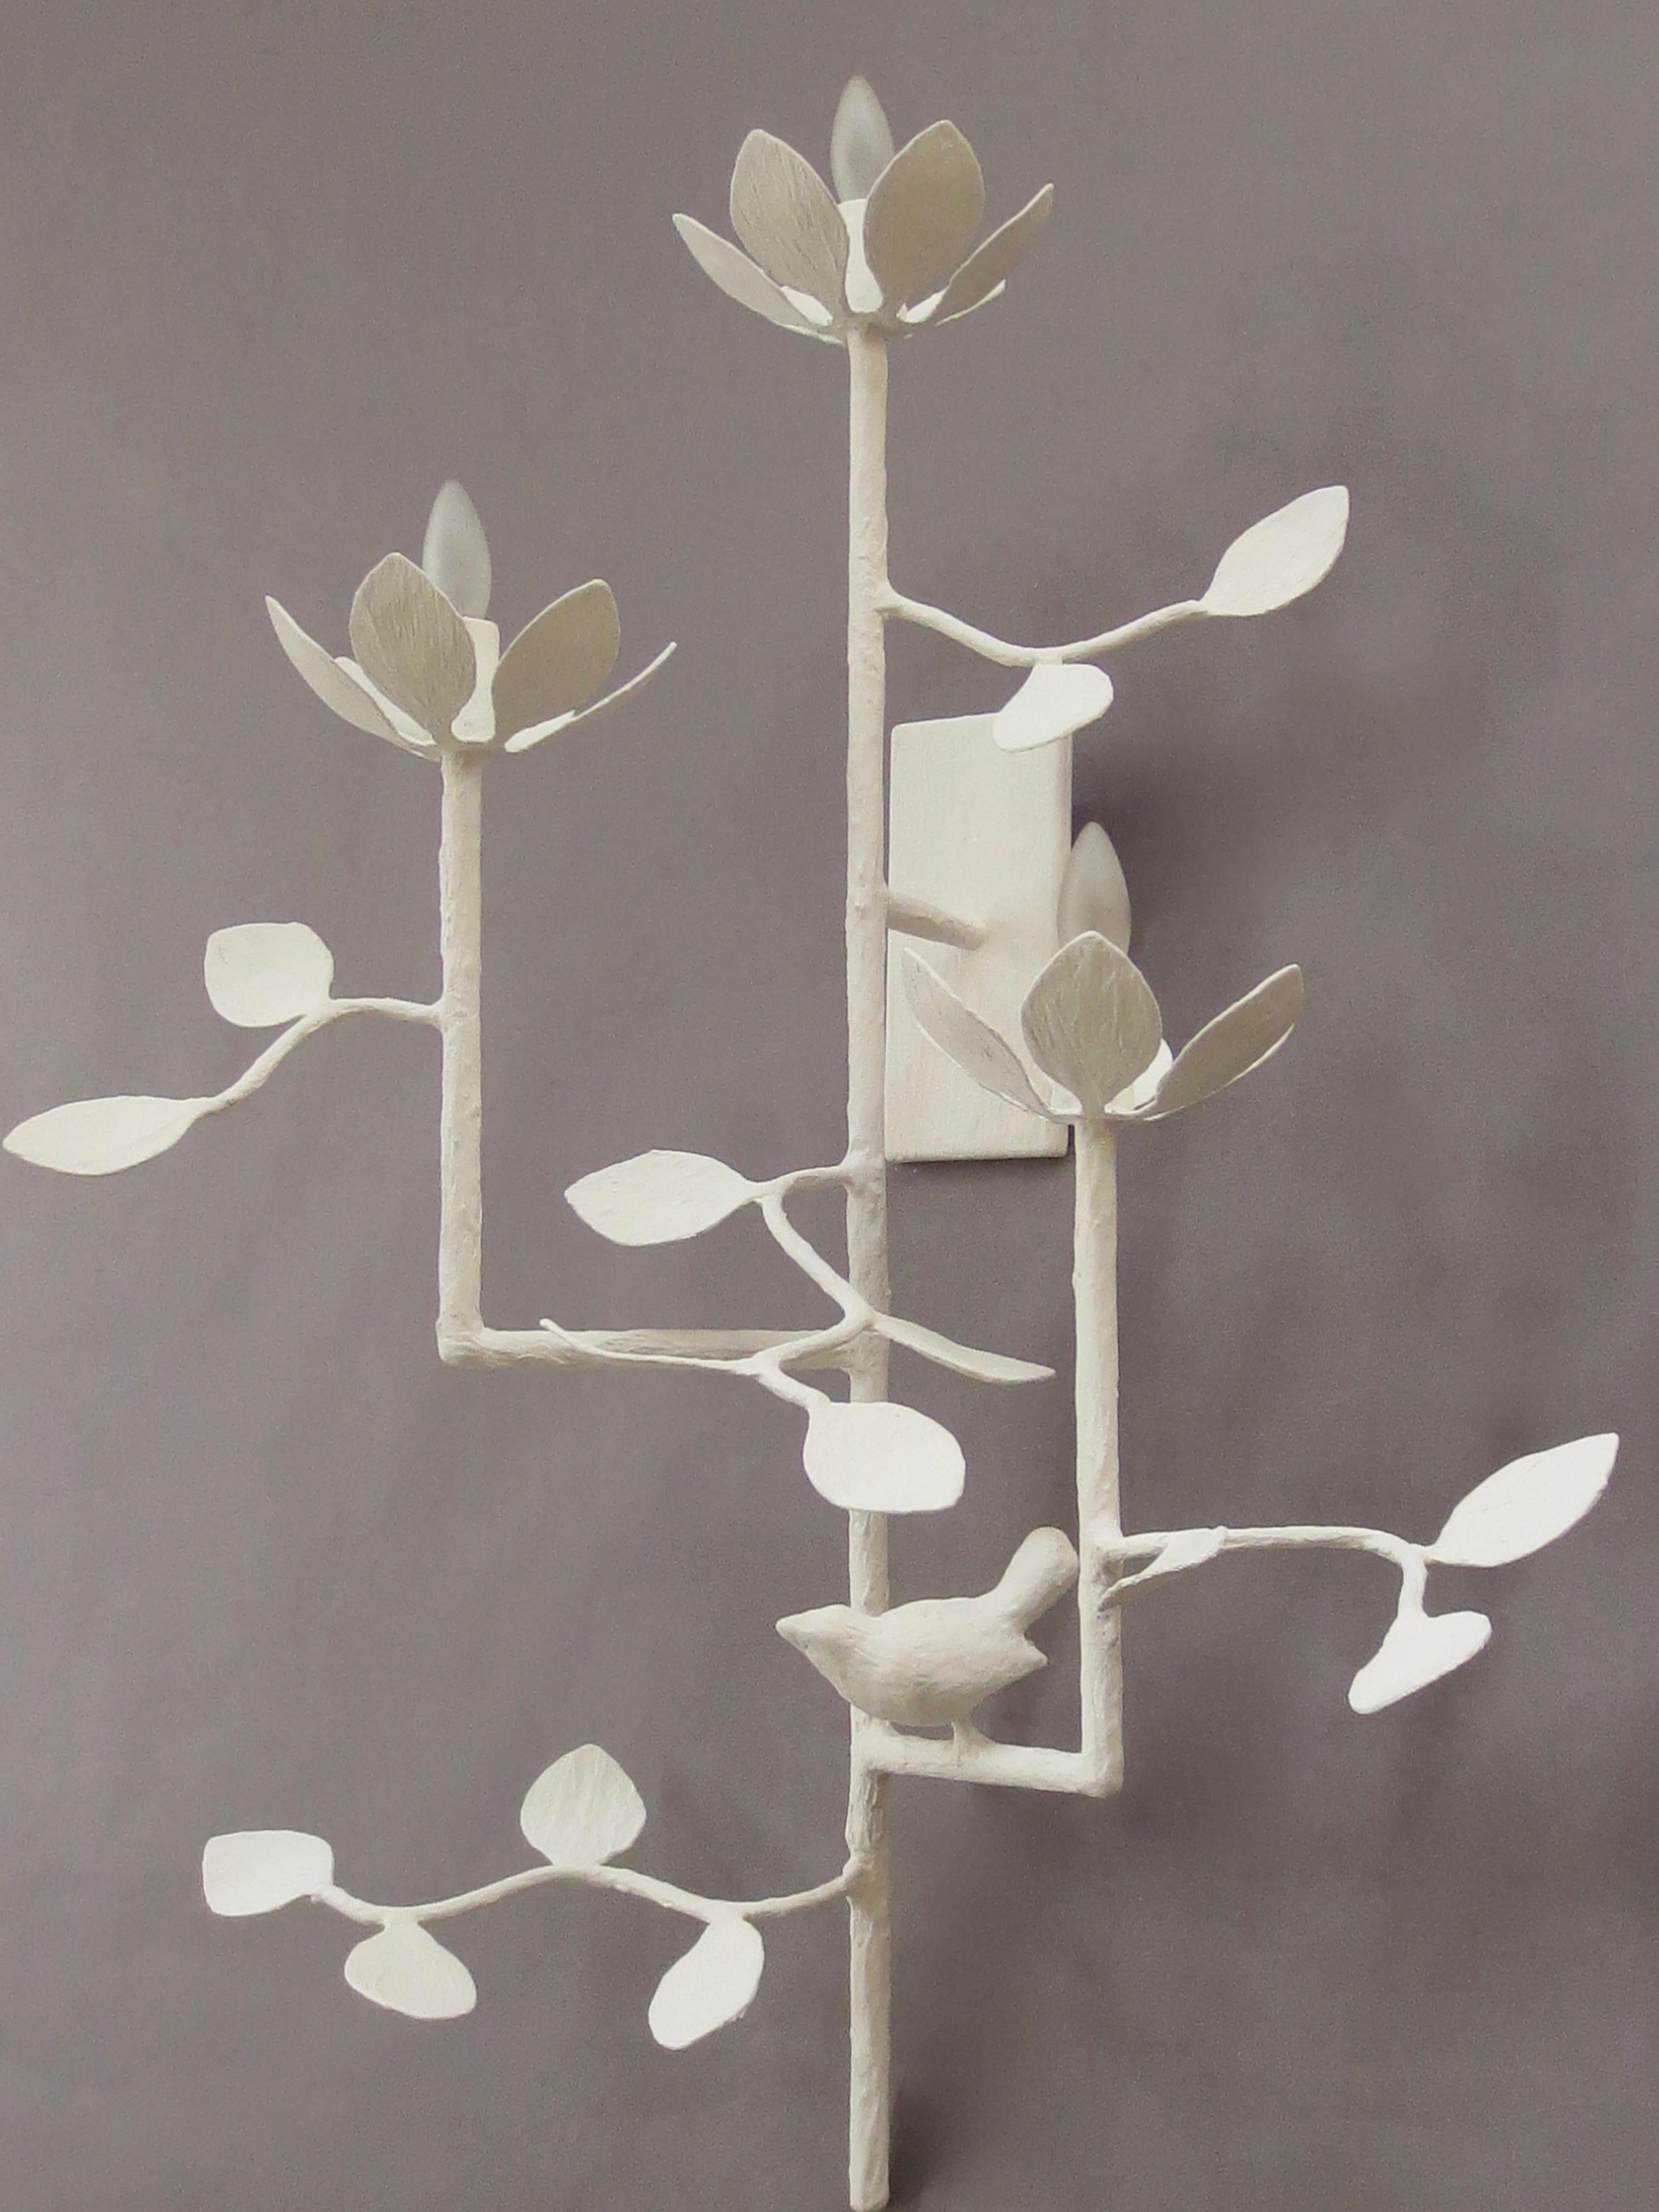 Lotus 3 arm plaster wall sconce by Tracey Garet of Apsara Interior Design includes 3 lights on various levels. A single bird adorns one of the arms and leaves are detailed throughout. The 3 lotus flowers each contain a candelabra light. The